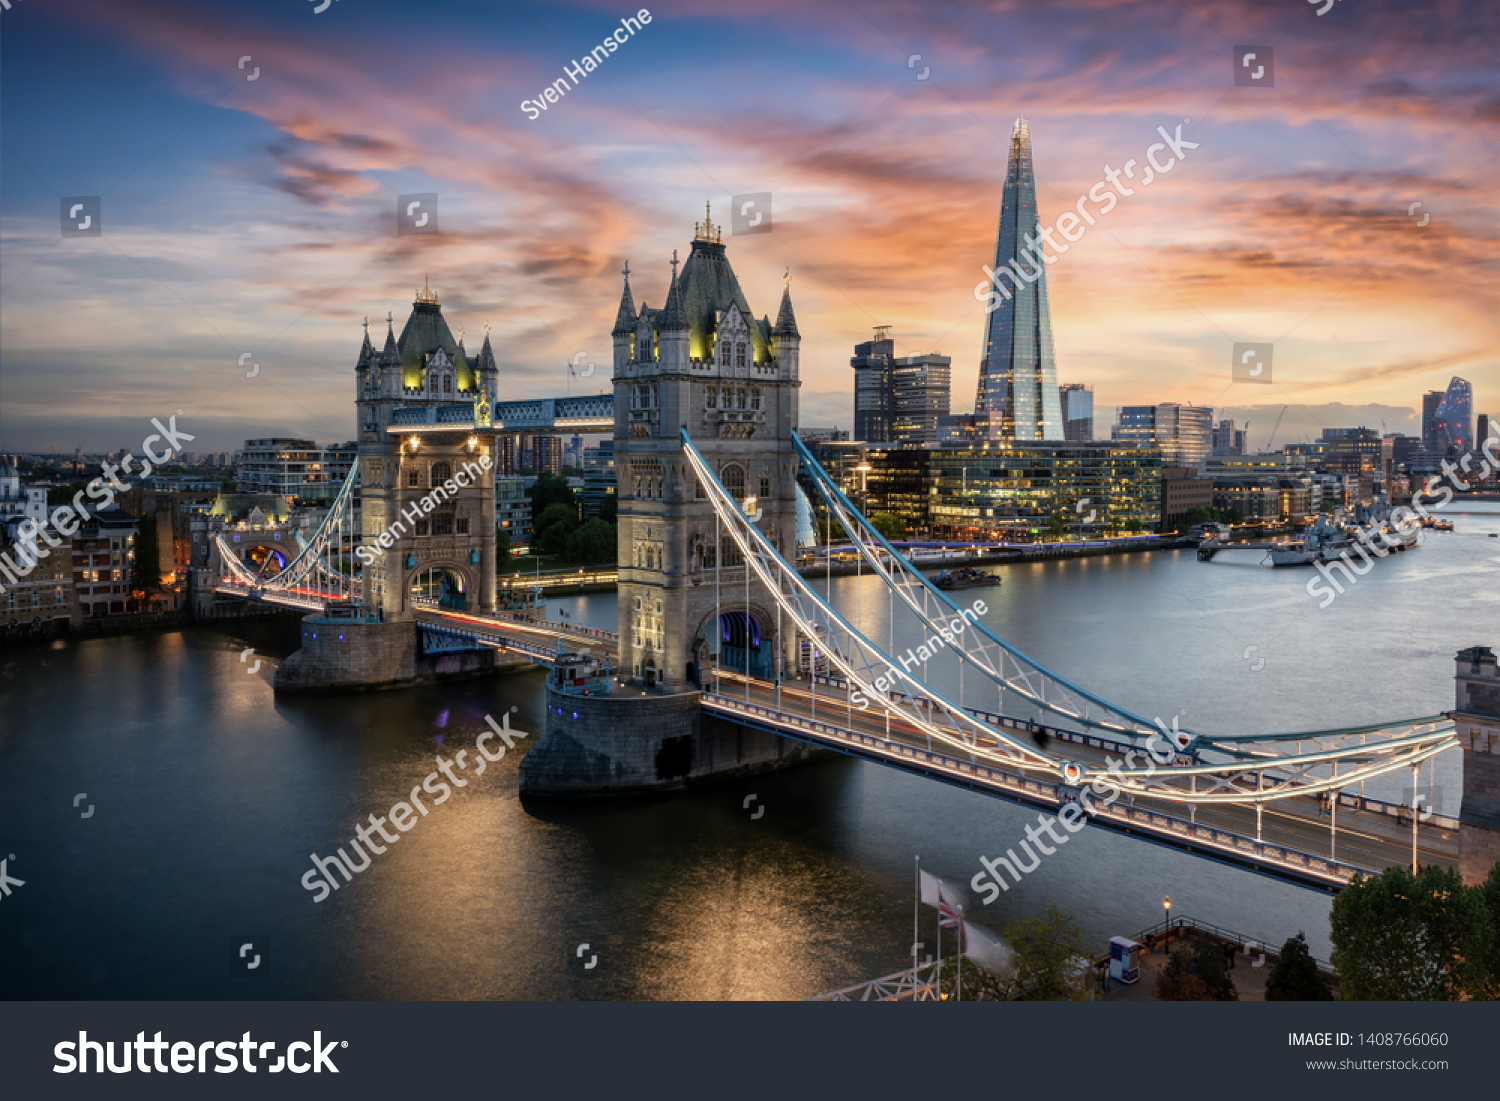 Aerial view to the illuminated Tower Bridge and skyline of London, UK, just after sunset #1408766060